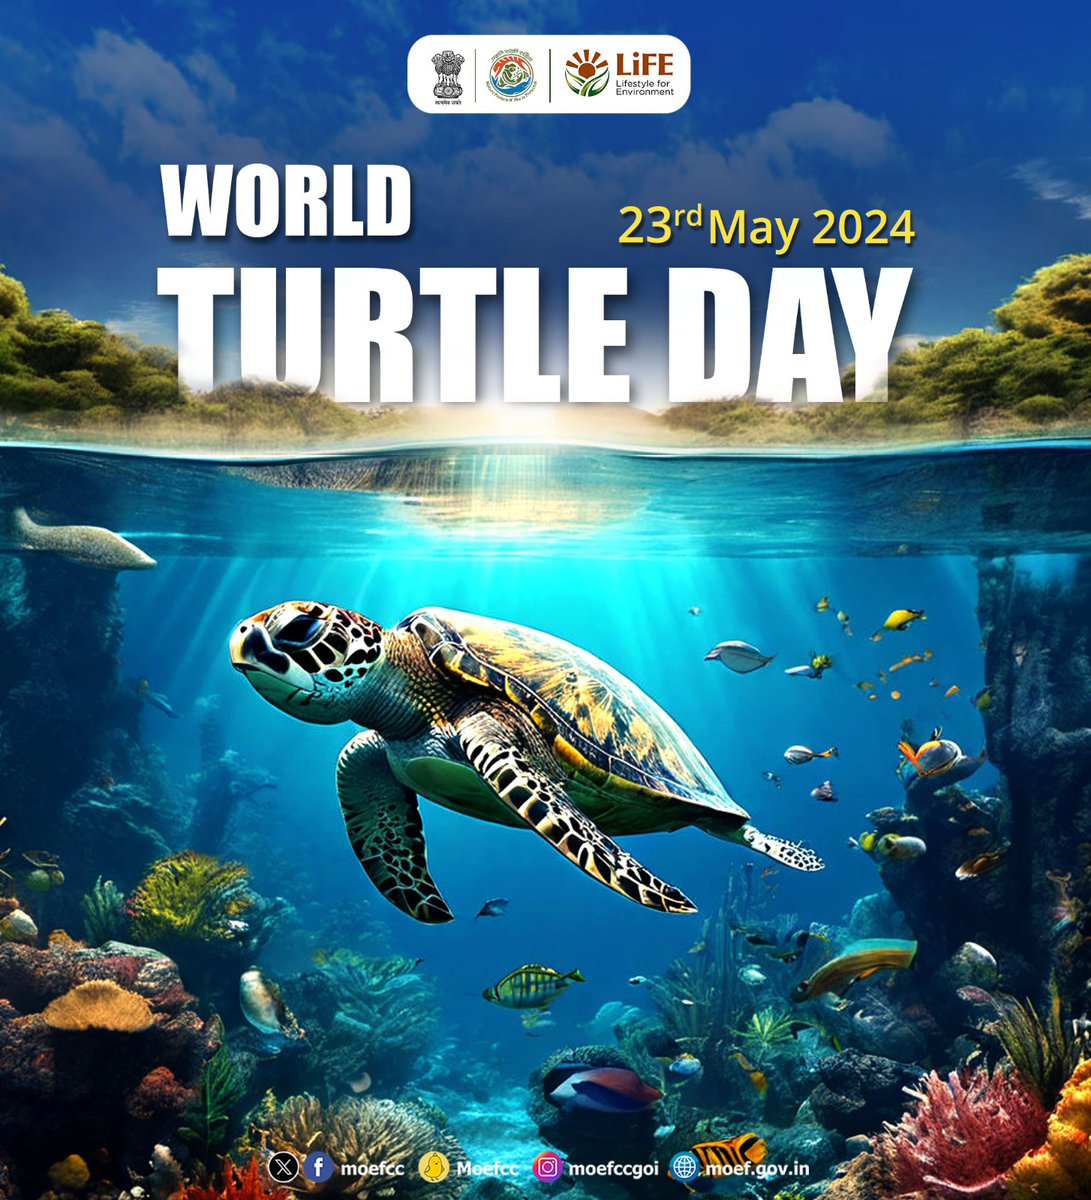 #Turtles play a vital role in maintaining a healthy ecosystem. On #WorldTurtleDay, let's commit to safeguarding them and securing their survival. 🐢🌍